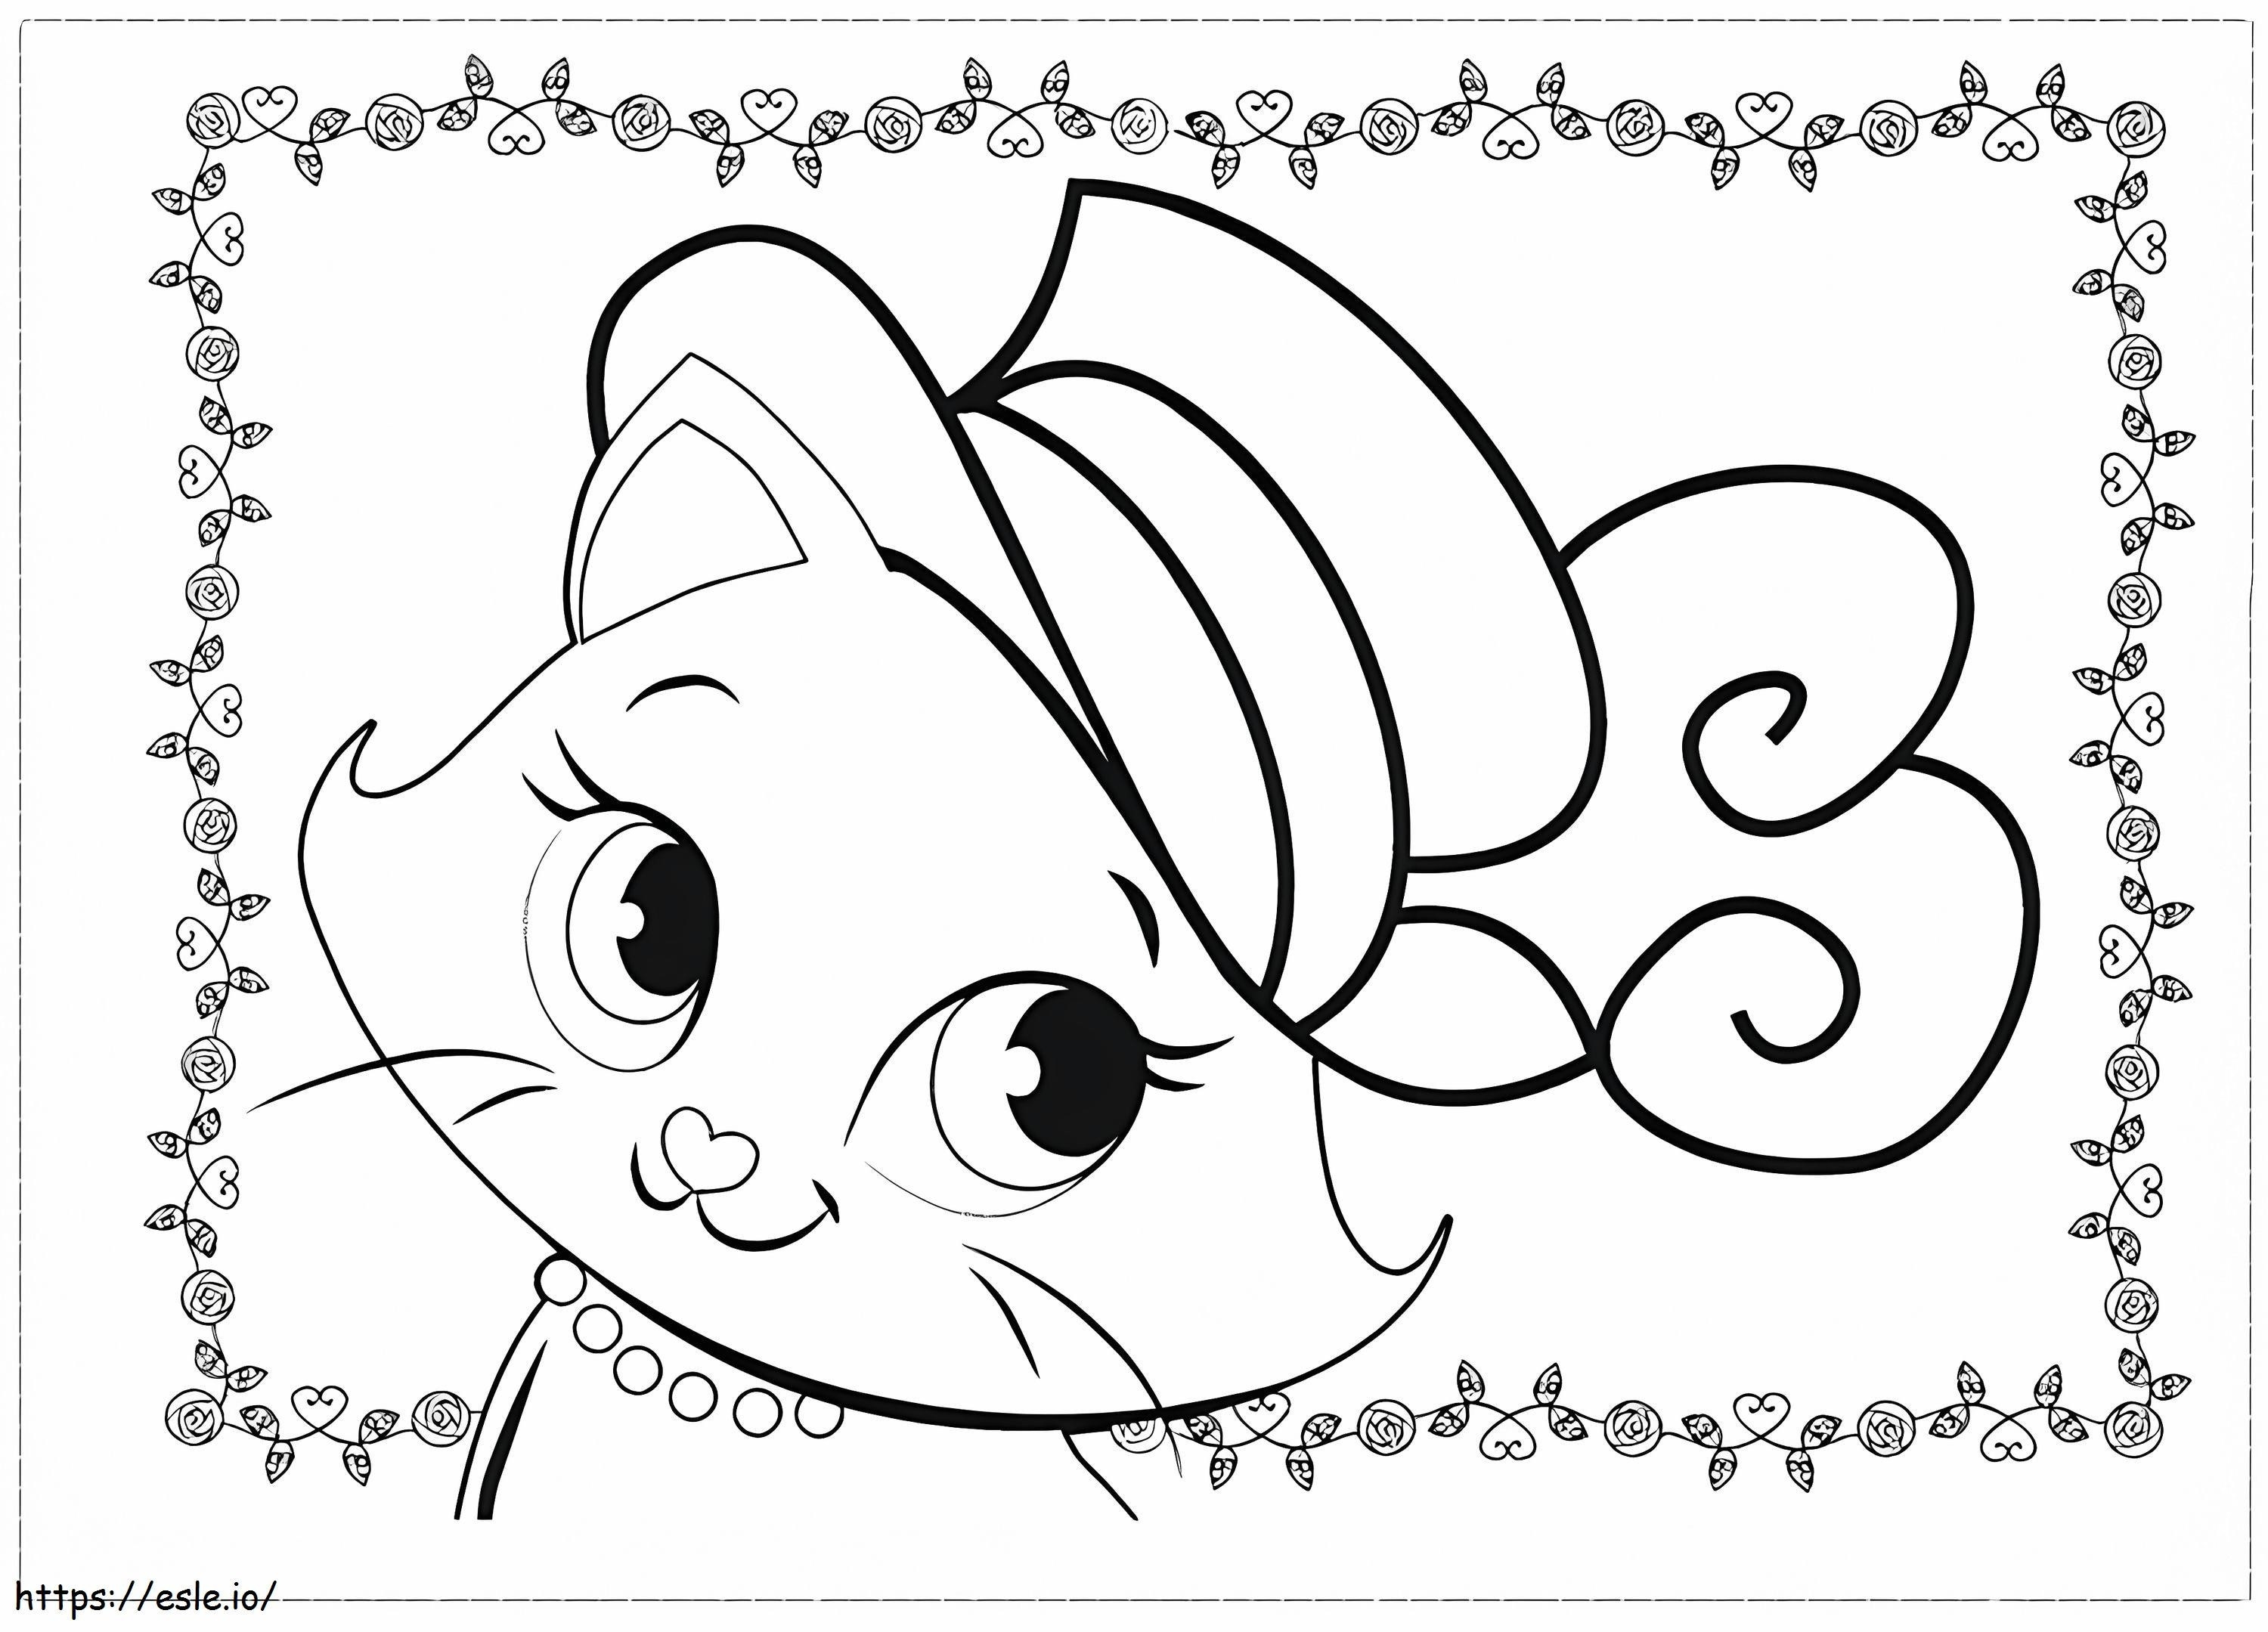 Disney Marie coloring page